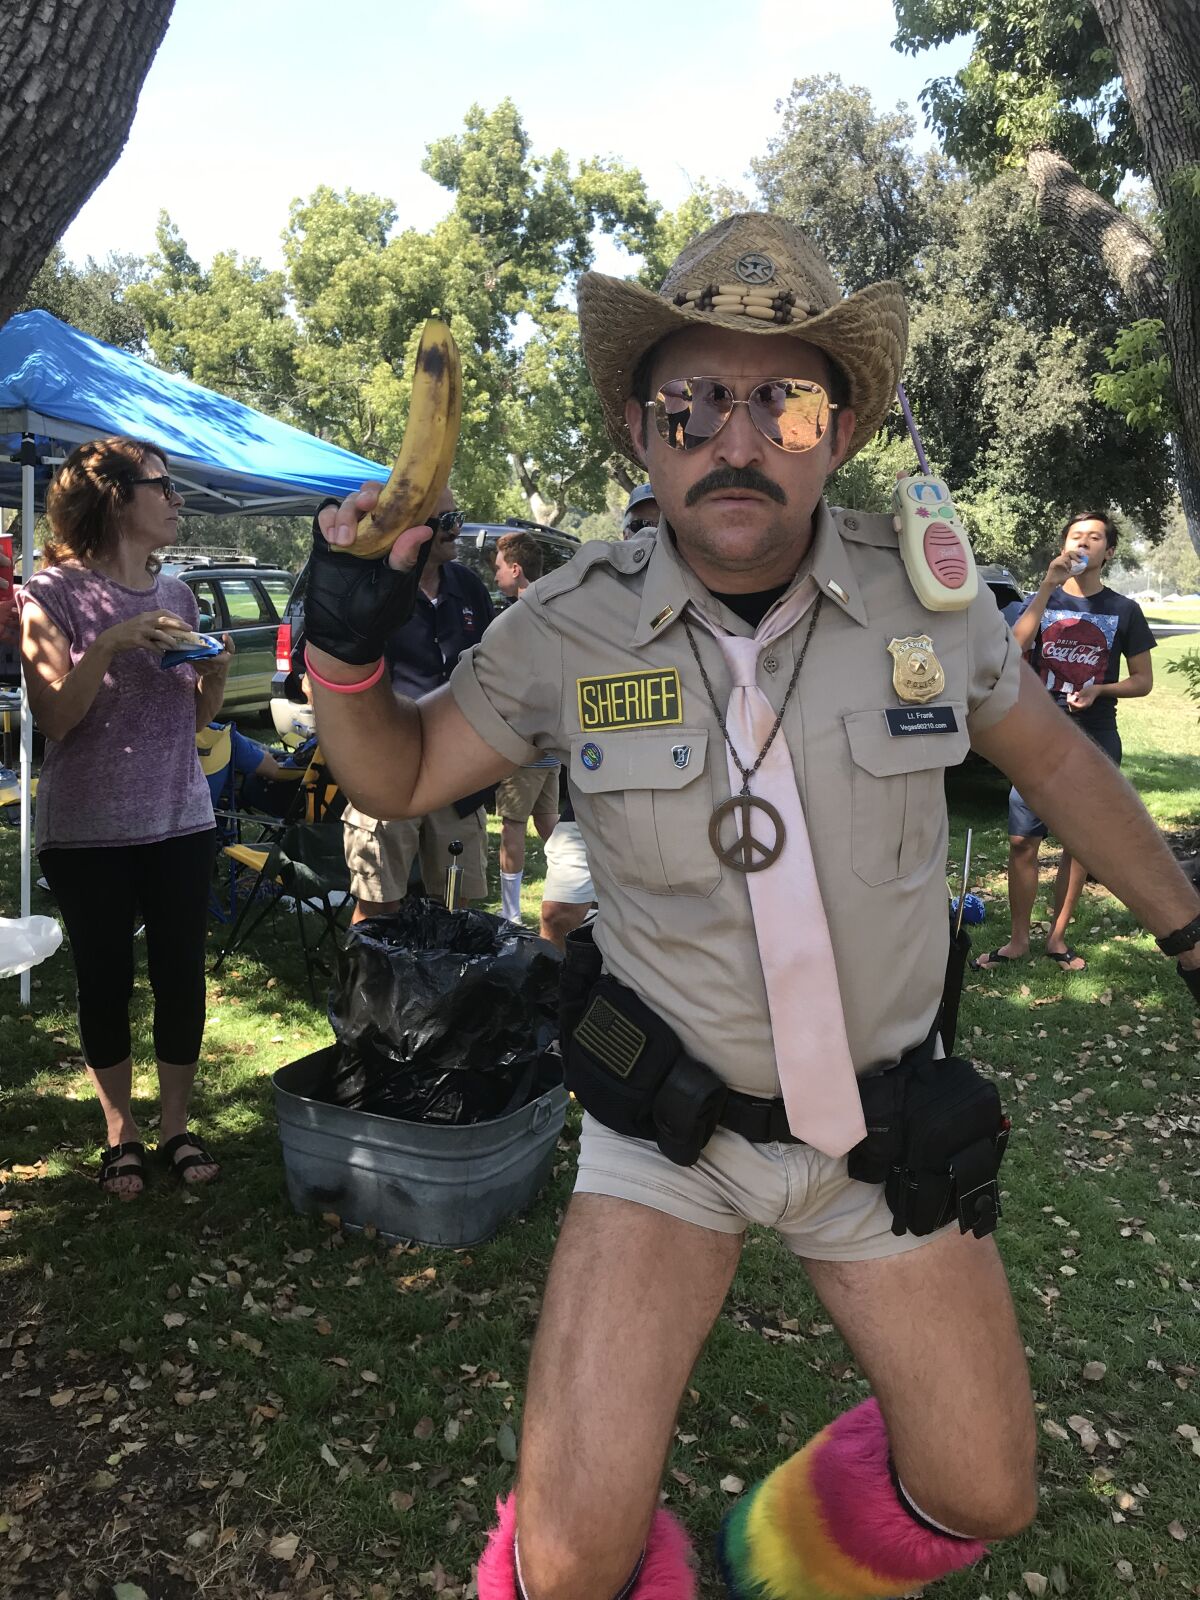 The faux law, a tailgate party crasher dressed for "Reno 911!"